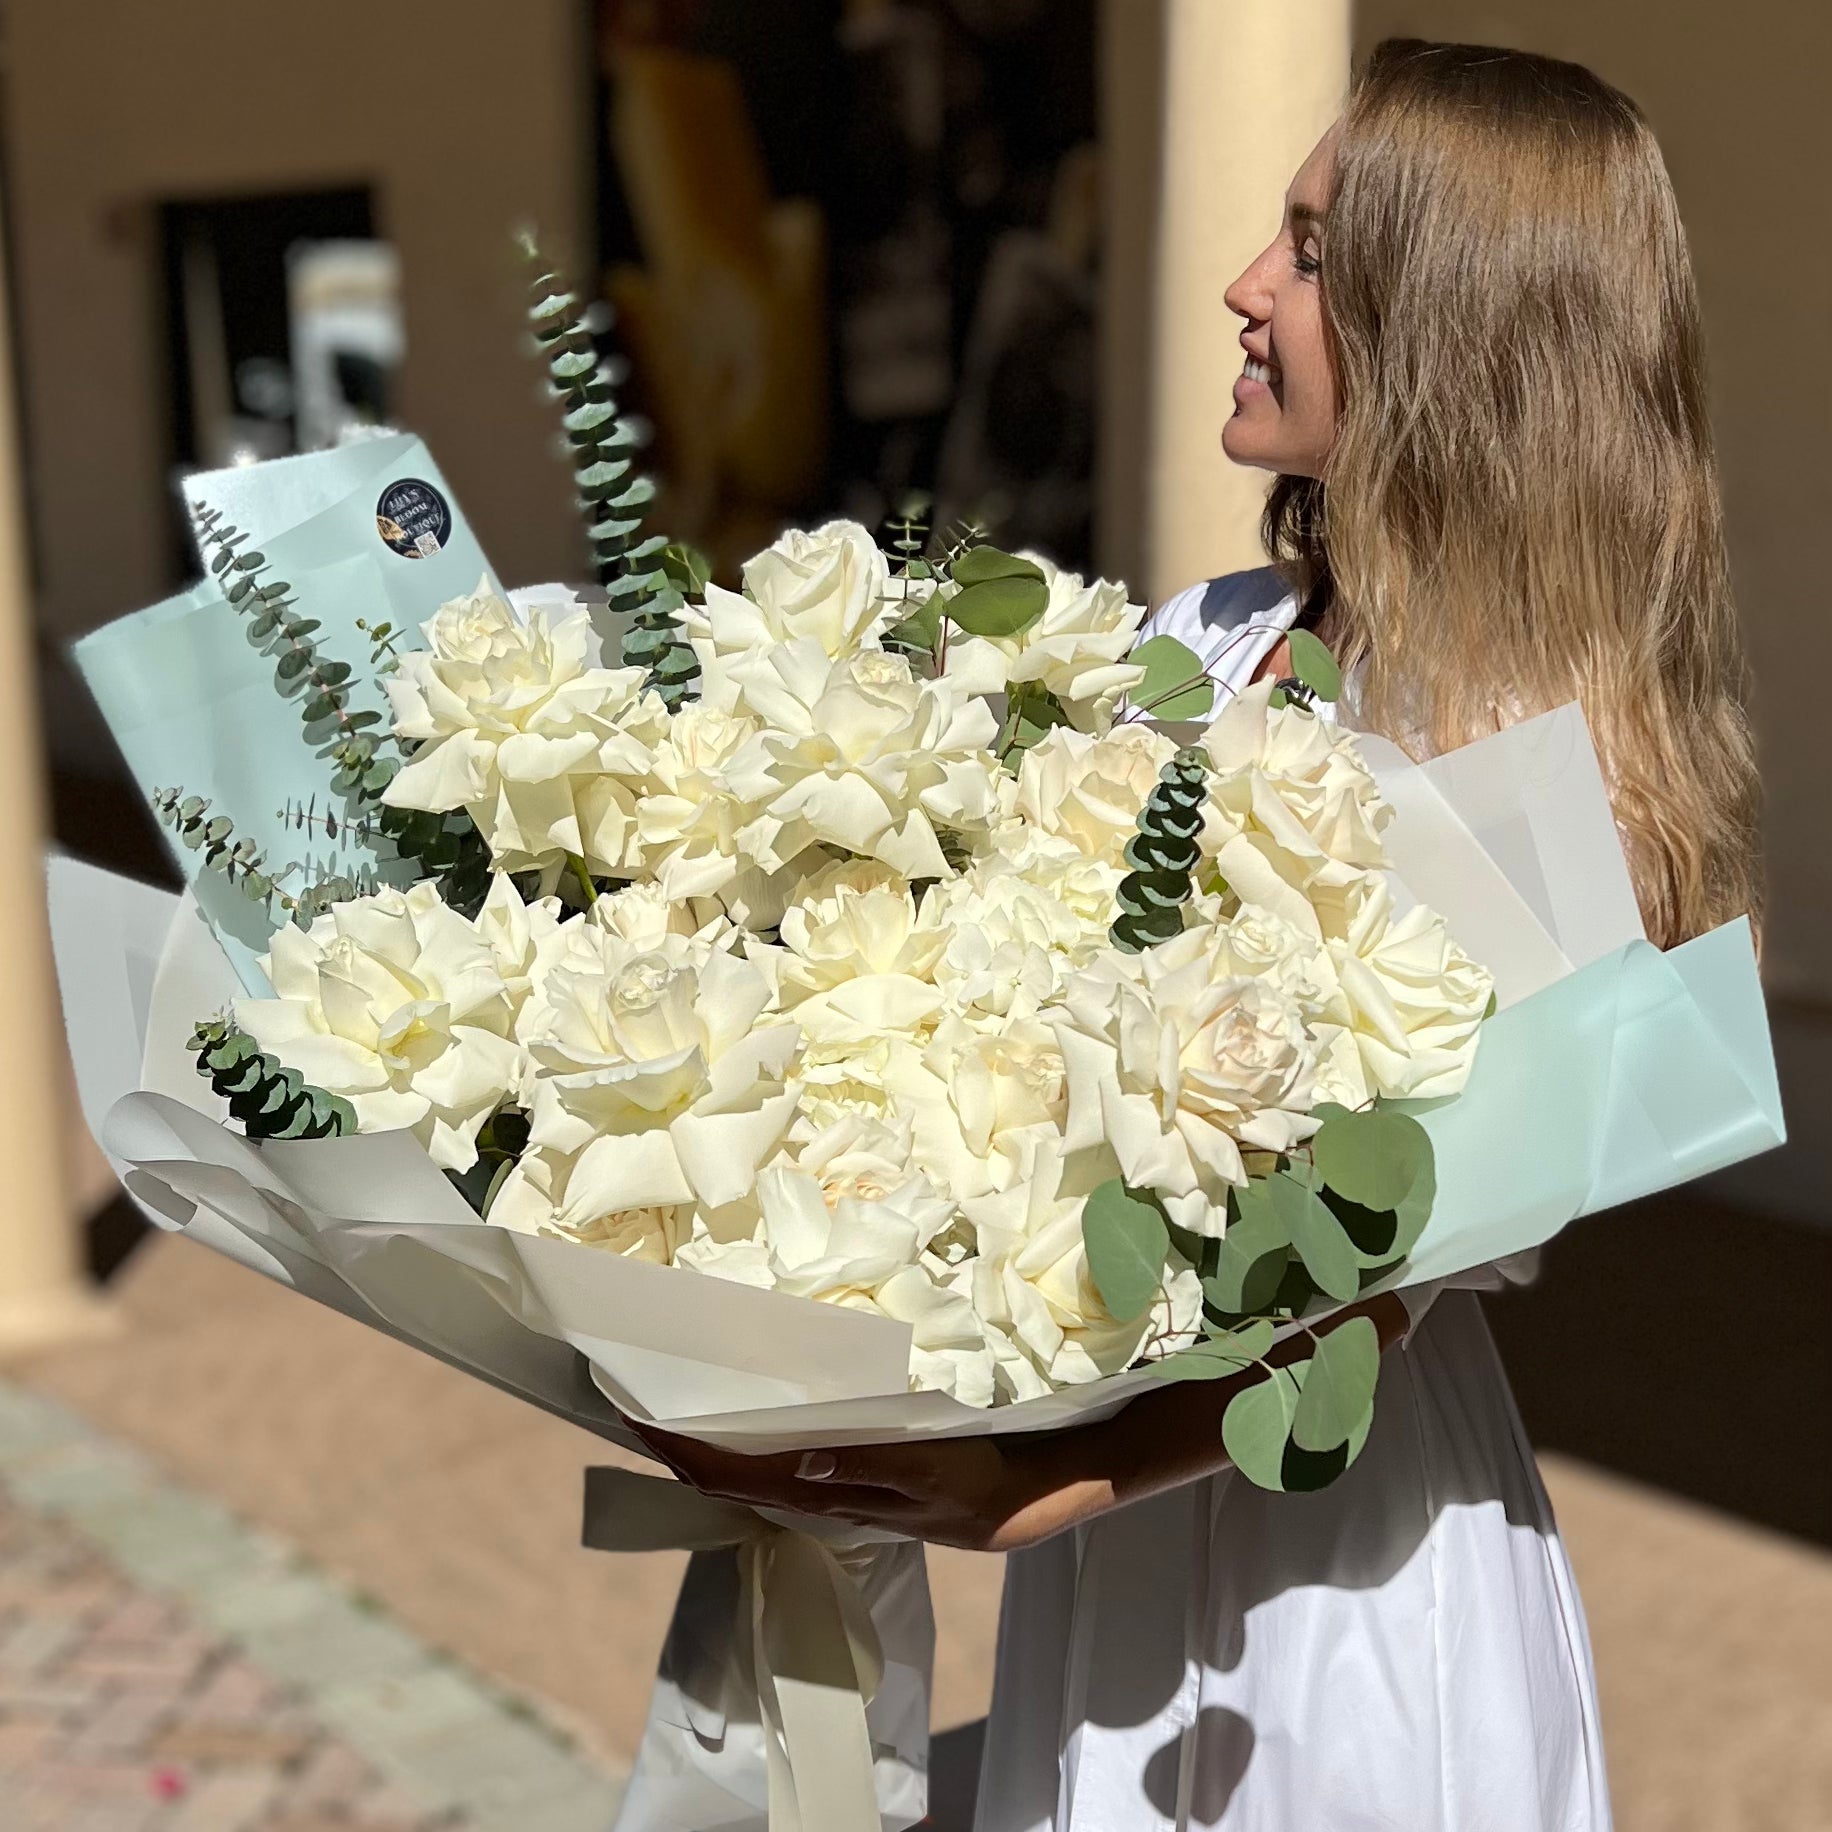 A woman carrying a large white bouquet of premium roses